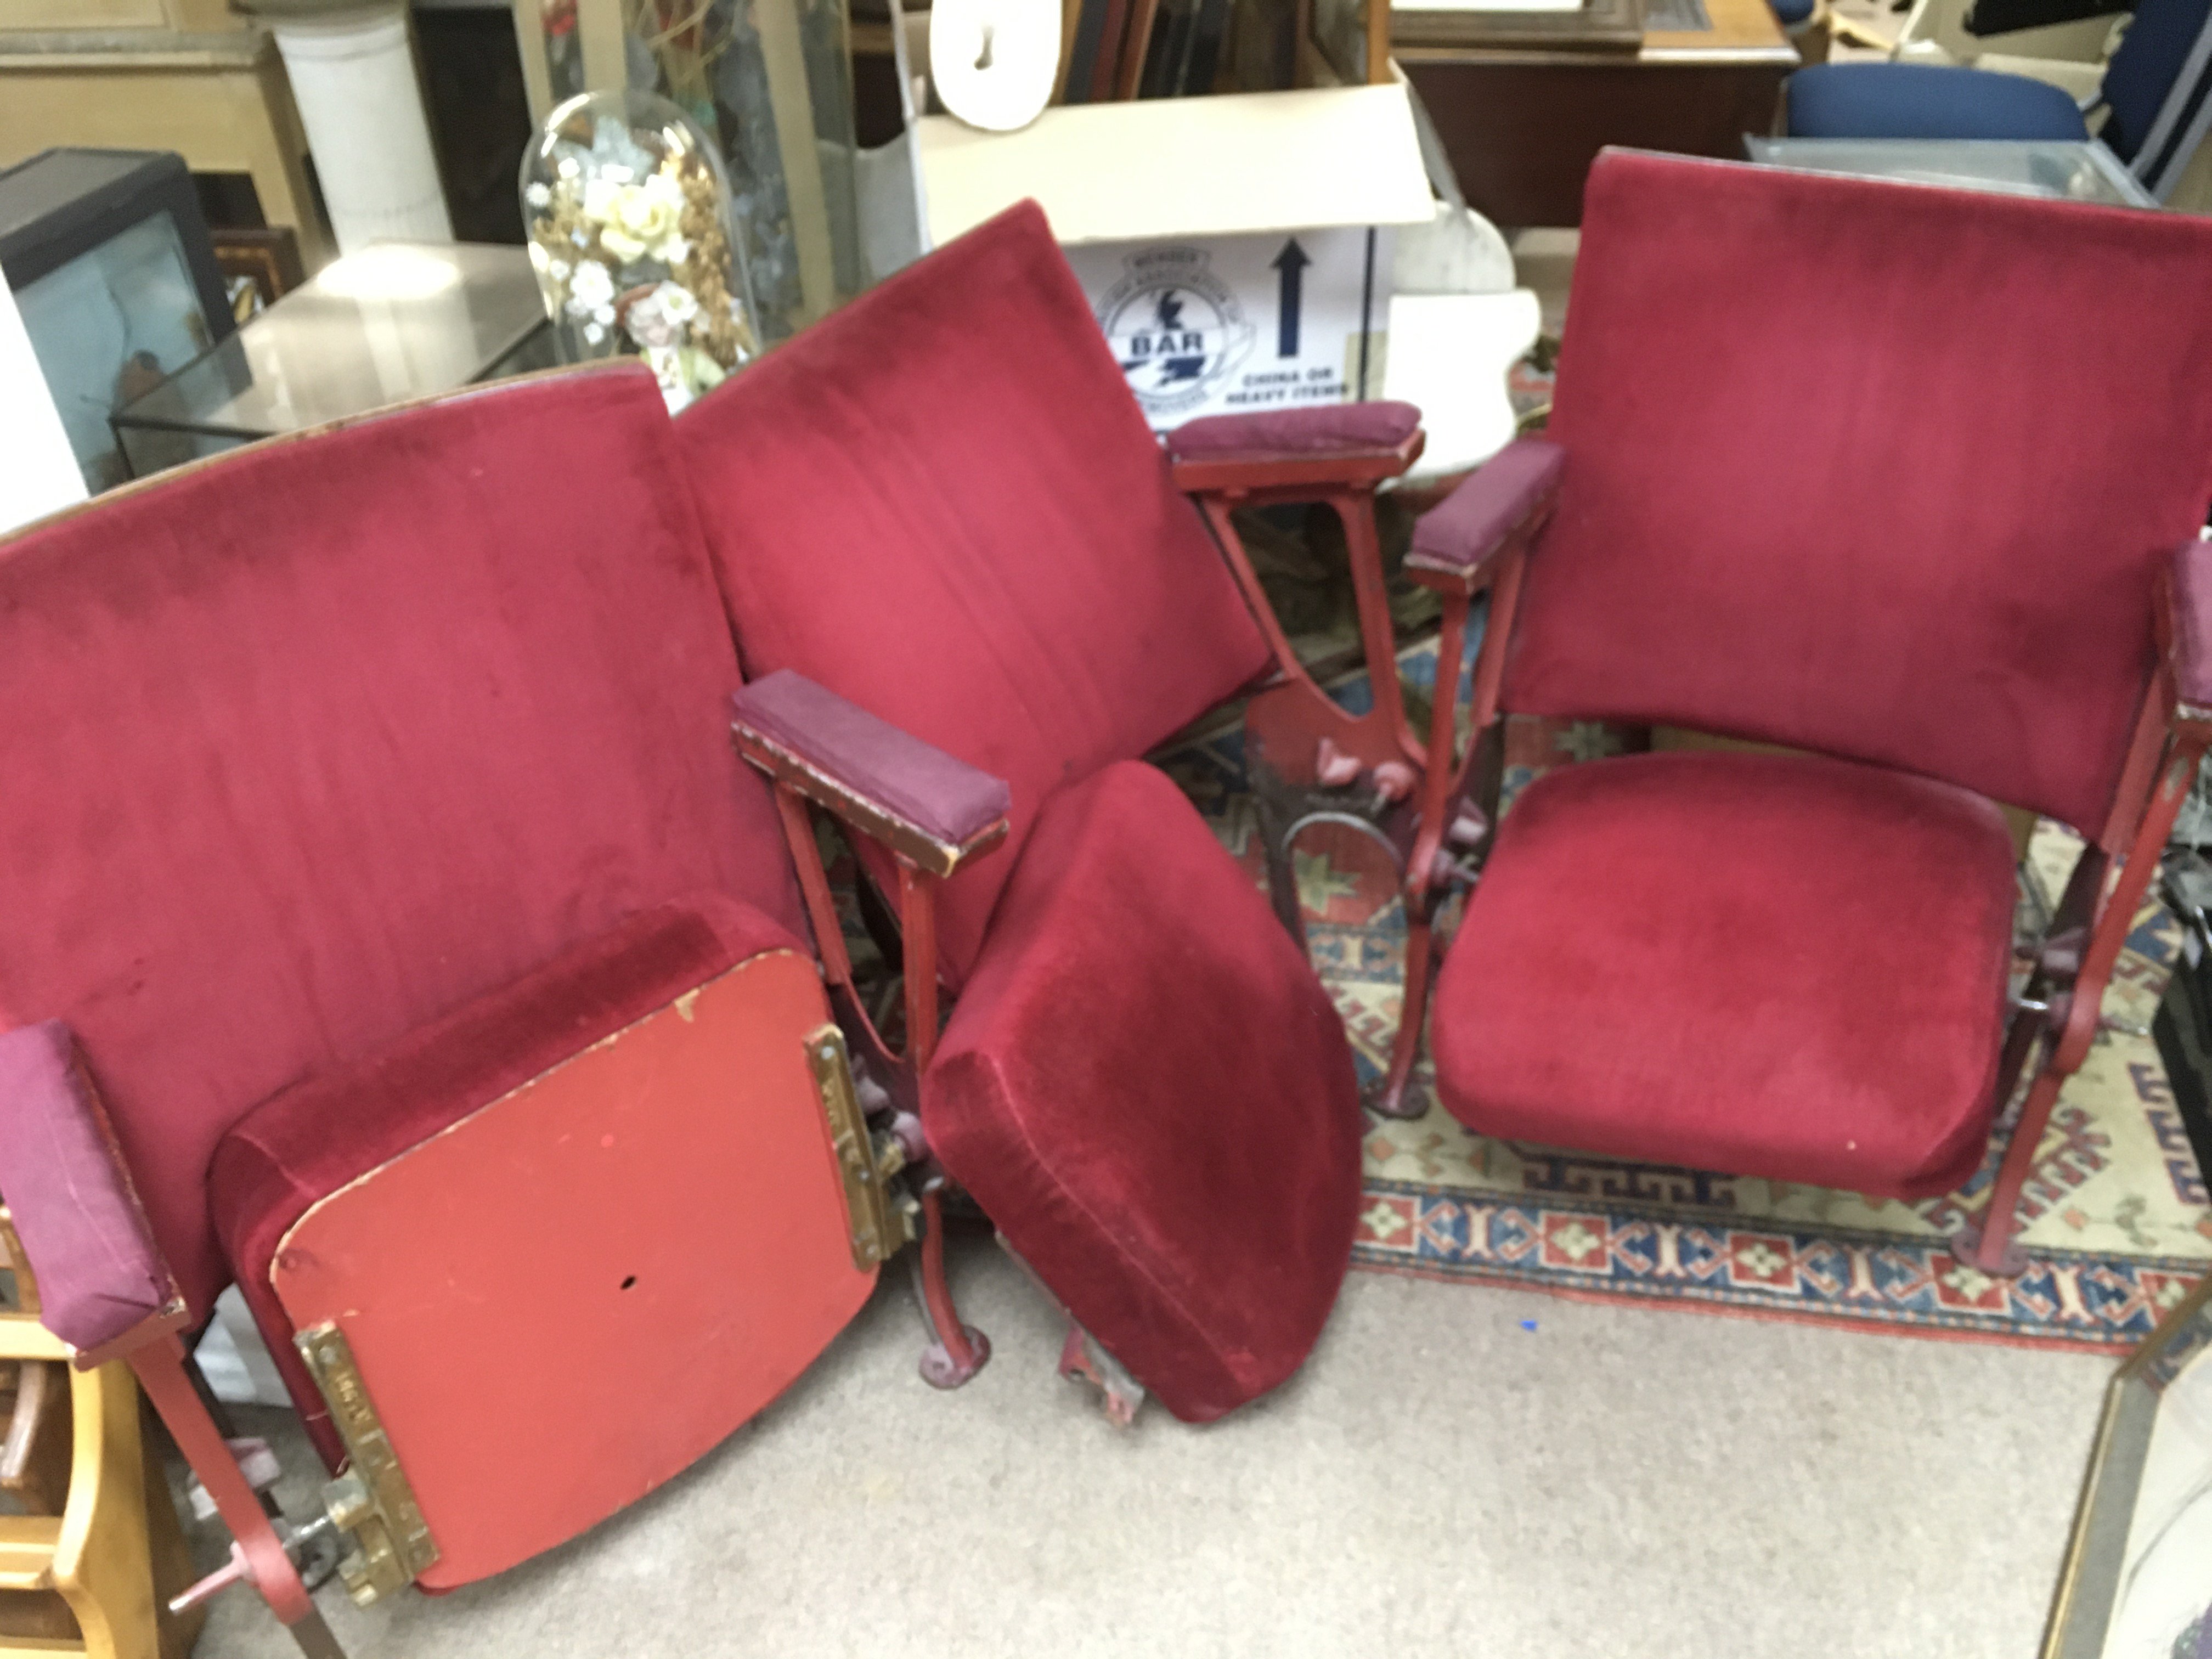 Three old cinema seats with red fabric upholstery.